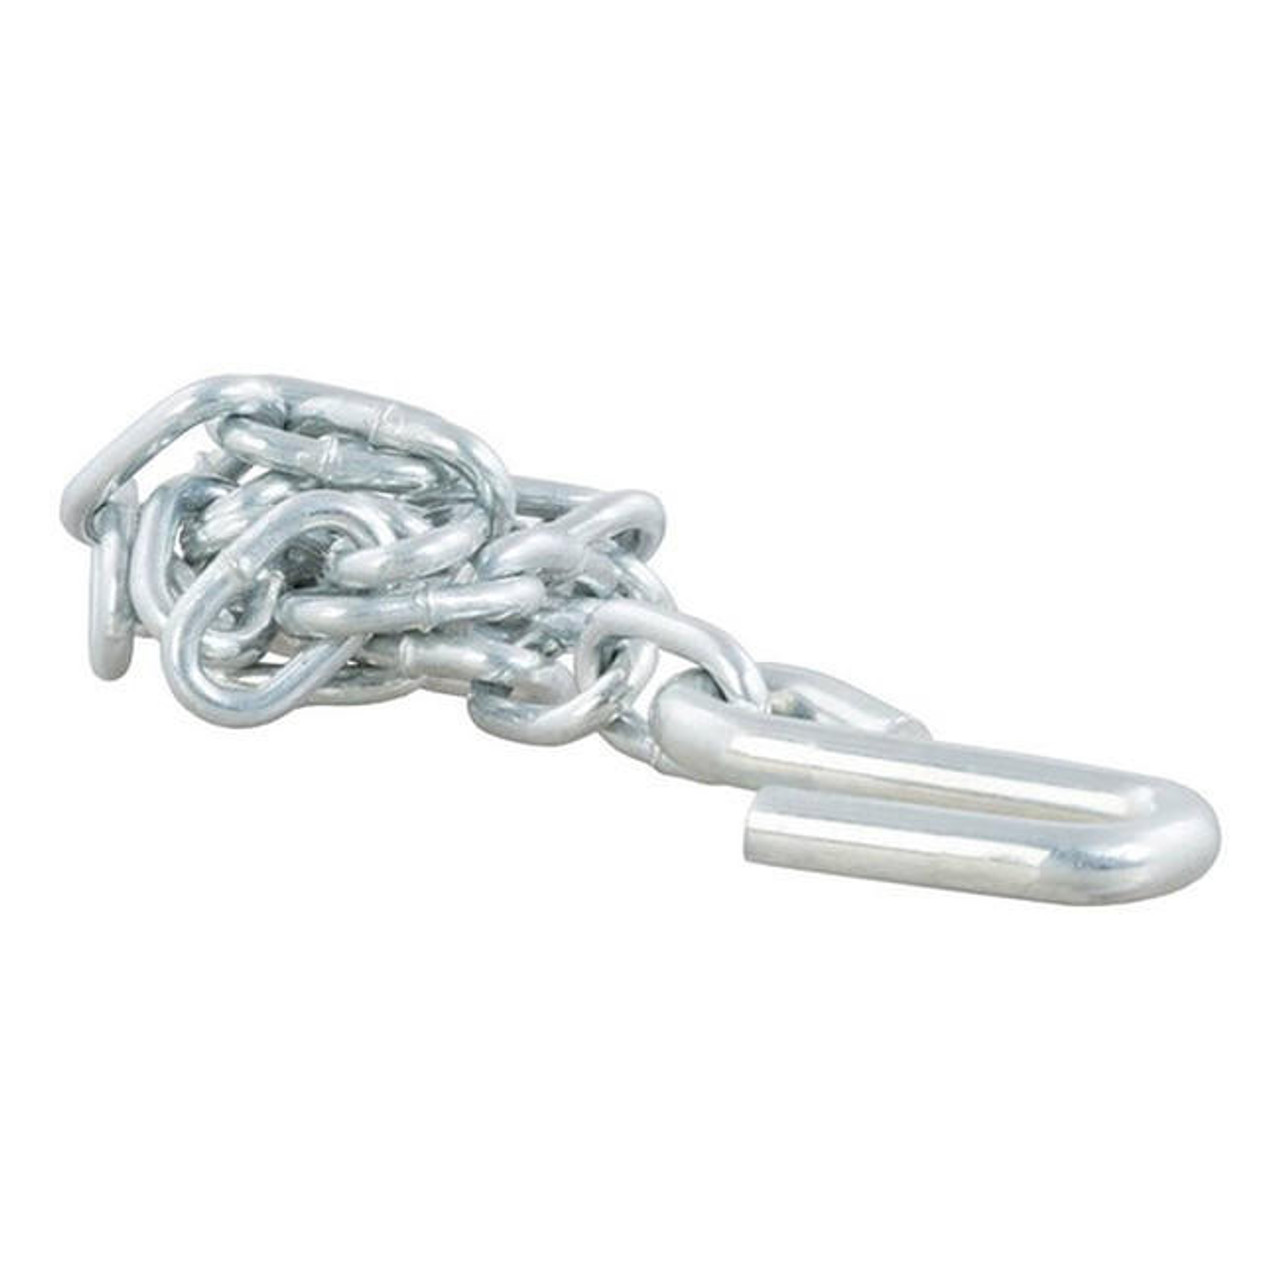 https://cdn11.bigcommerce.com/s-ohy7i05/images/stencil/1280x1280/products/1632/25676/curt-safety-chain-assembly-2000lbs-minimum-break-force-30-grade-incl-316-in-x-24-in-chain-1-38-in-s-hookj-26__46017.1688591021.jpg?c=3